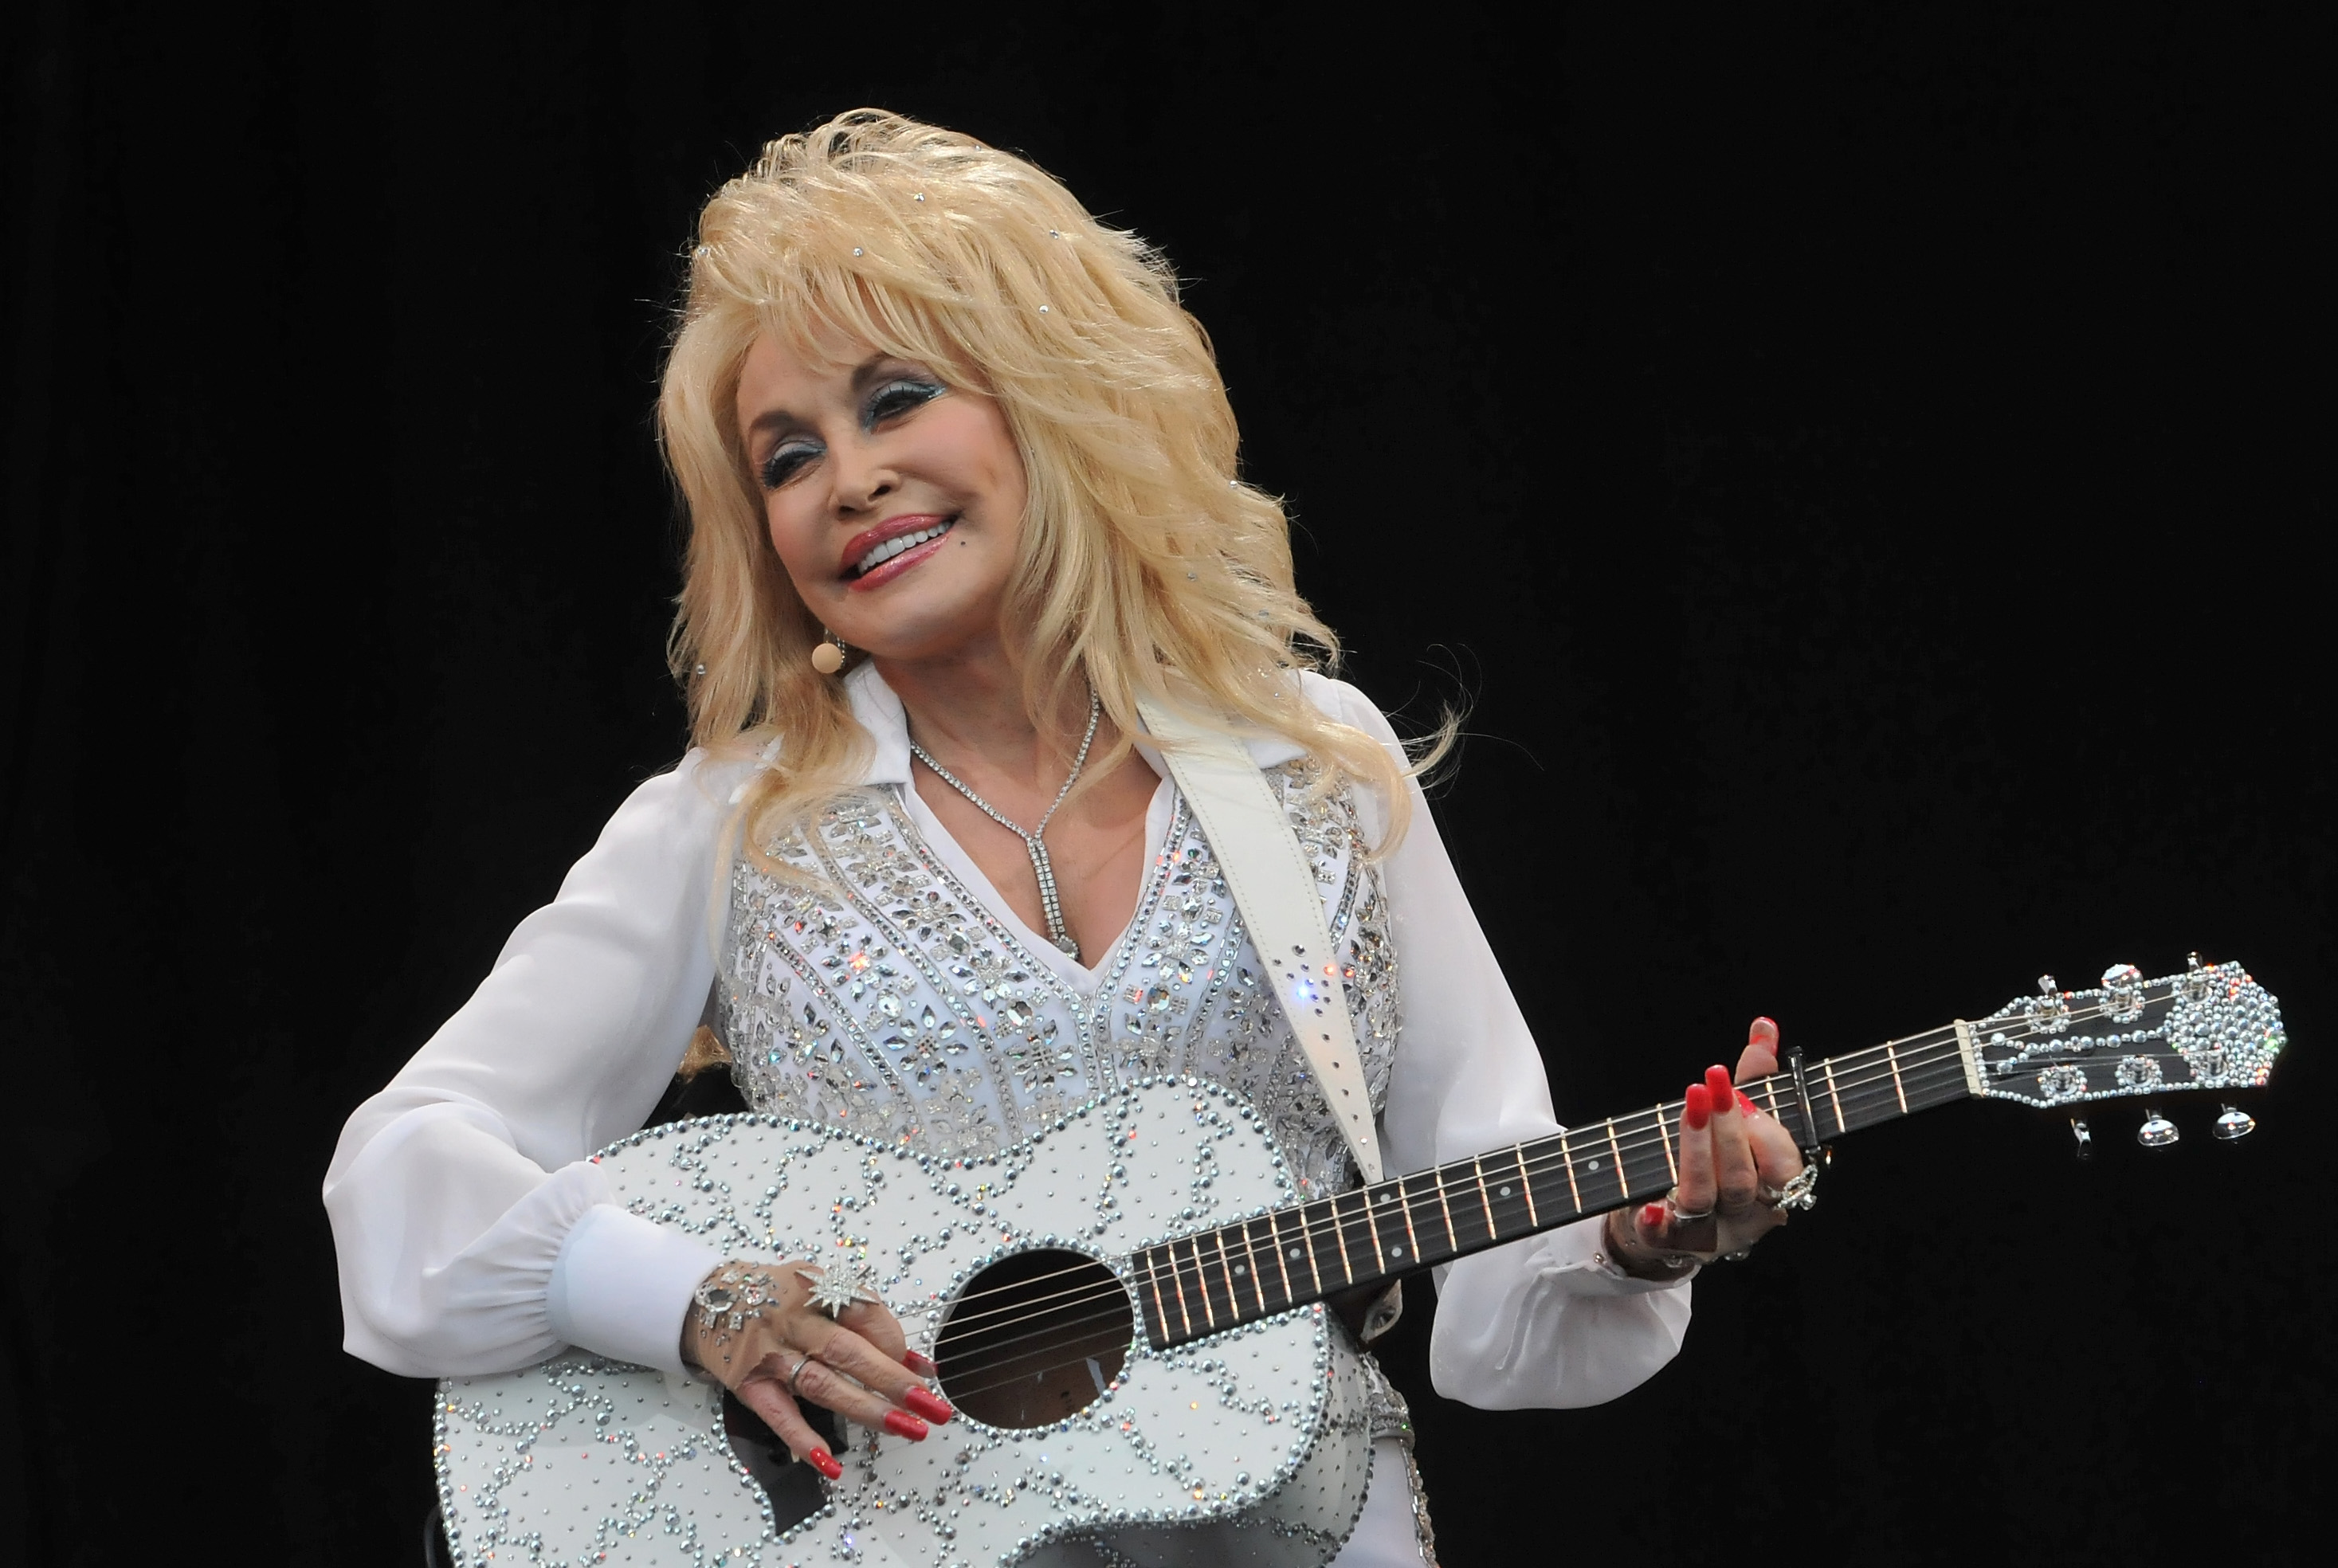 Dolly Parton wears a white rhinestoned shirt and holds a matching guitar.